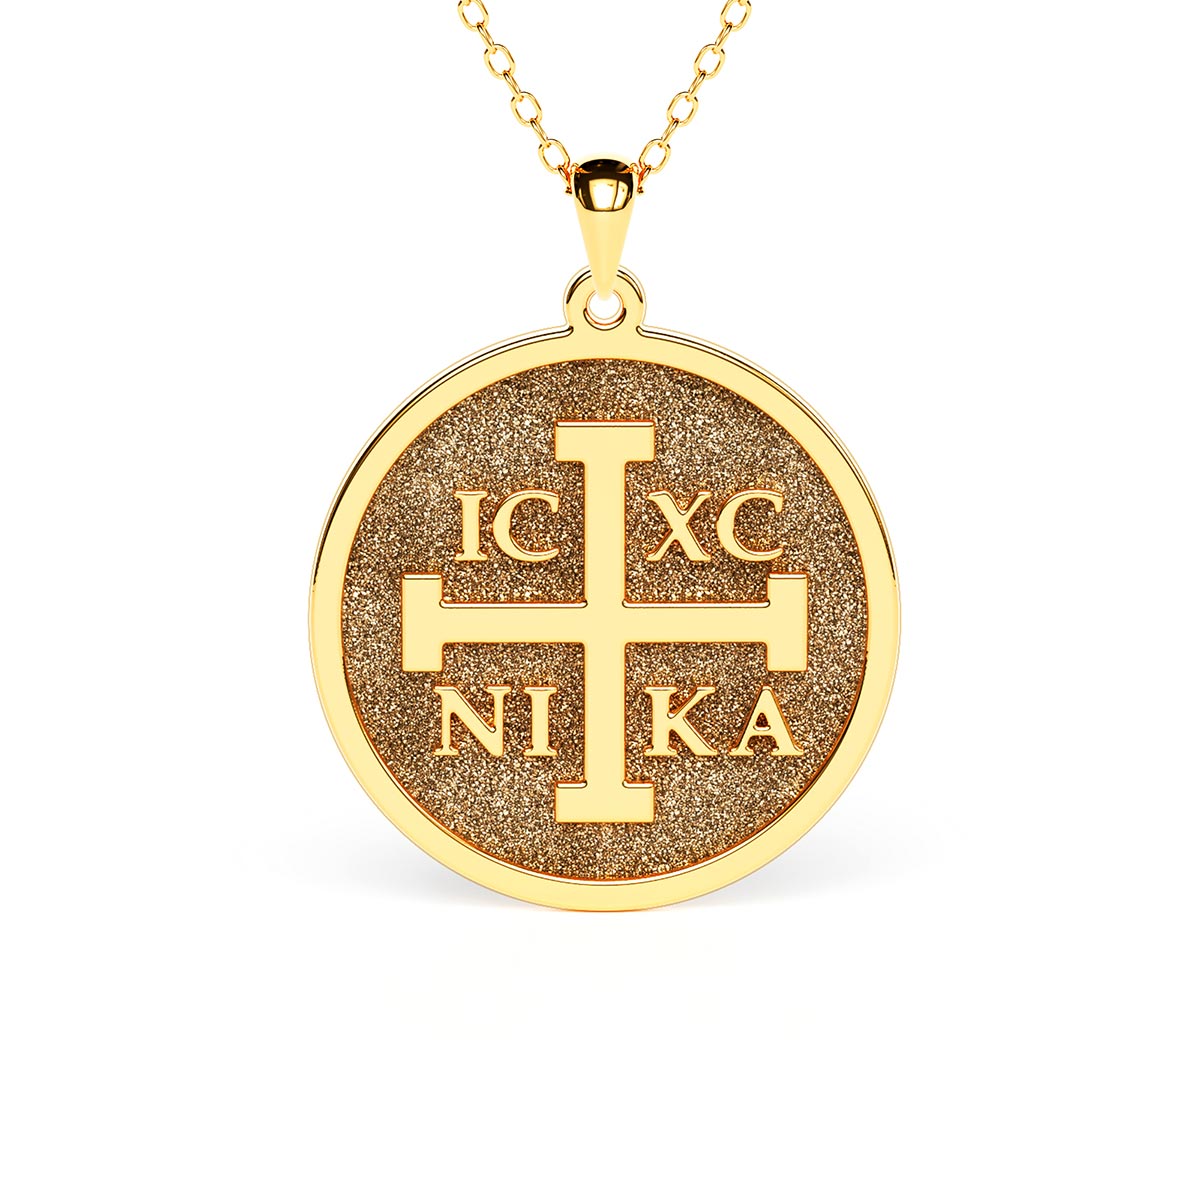 Buy Simple Tiny Greek Cross St. George's Christian Religious Symbol Plus  Sign Shape Charm Pendant Necklace 925 Sterling Silver N0238S Online in  India - Etsy